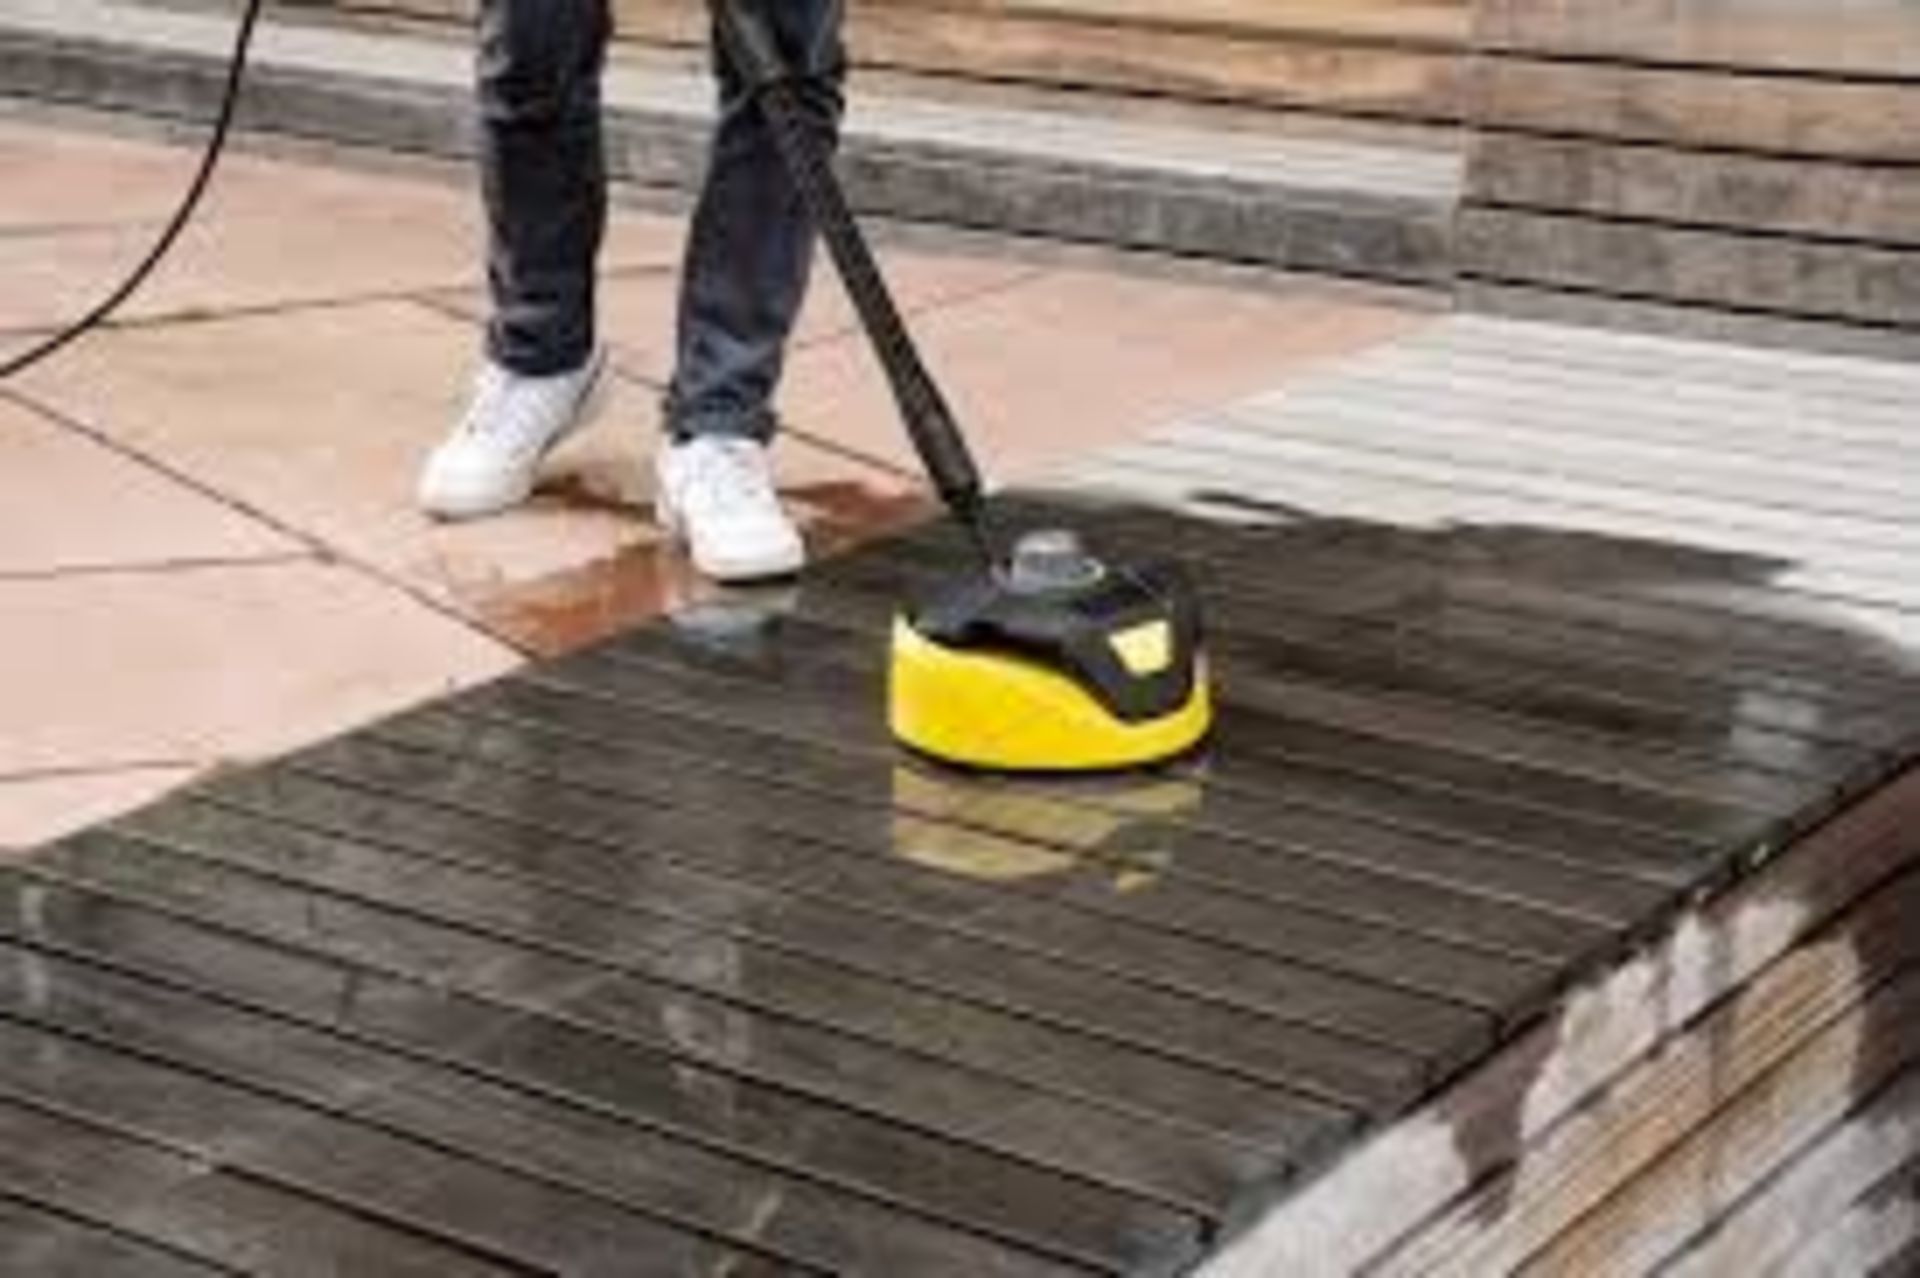 Trade lot 3 x Kärcher T 5 T-Racer surface cleaner Pressure washer patio & decking. - R14.14. RRP £